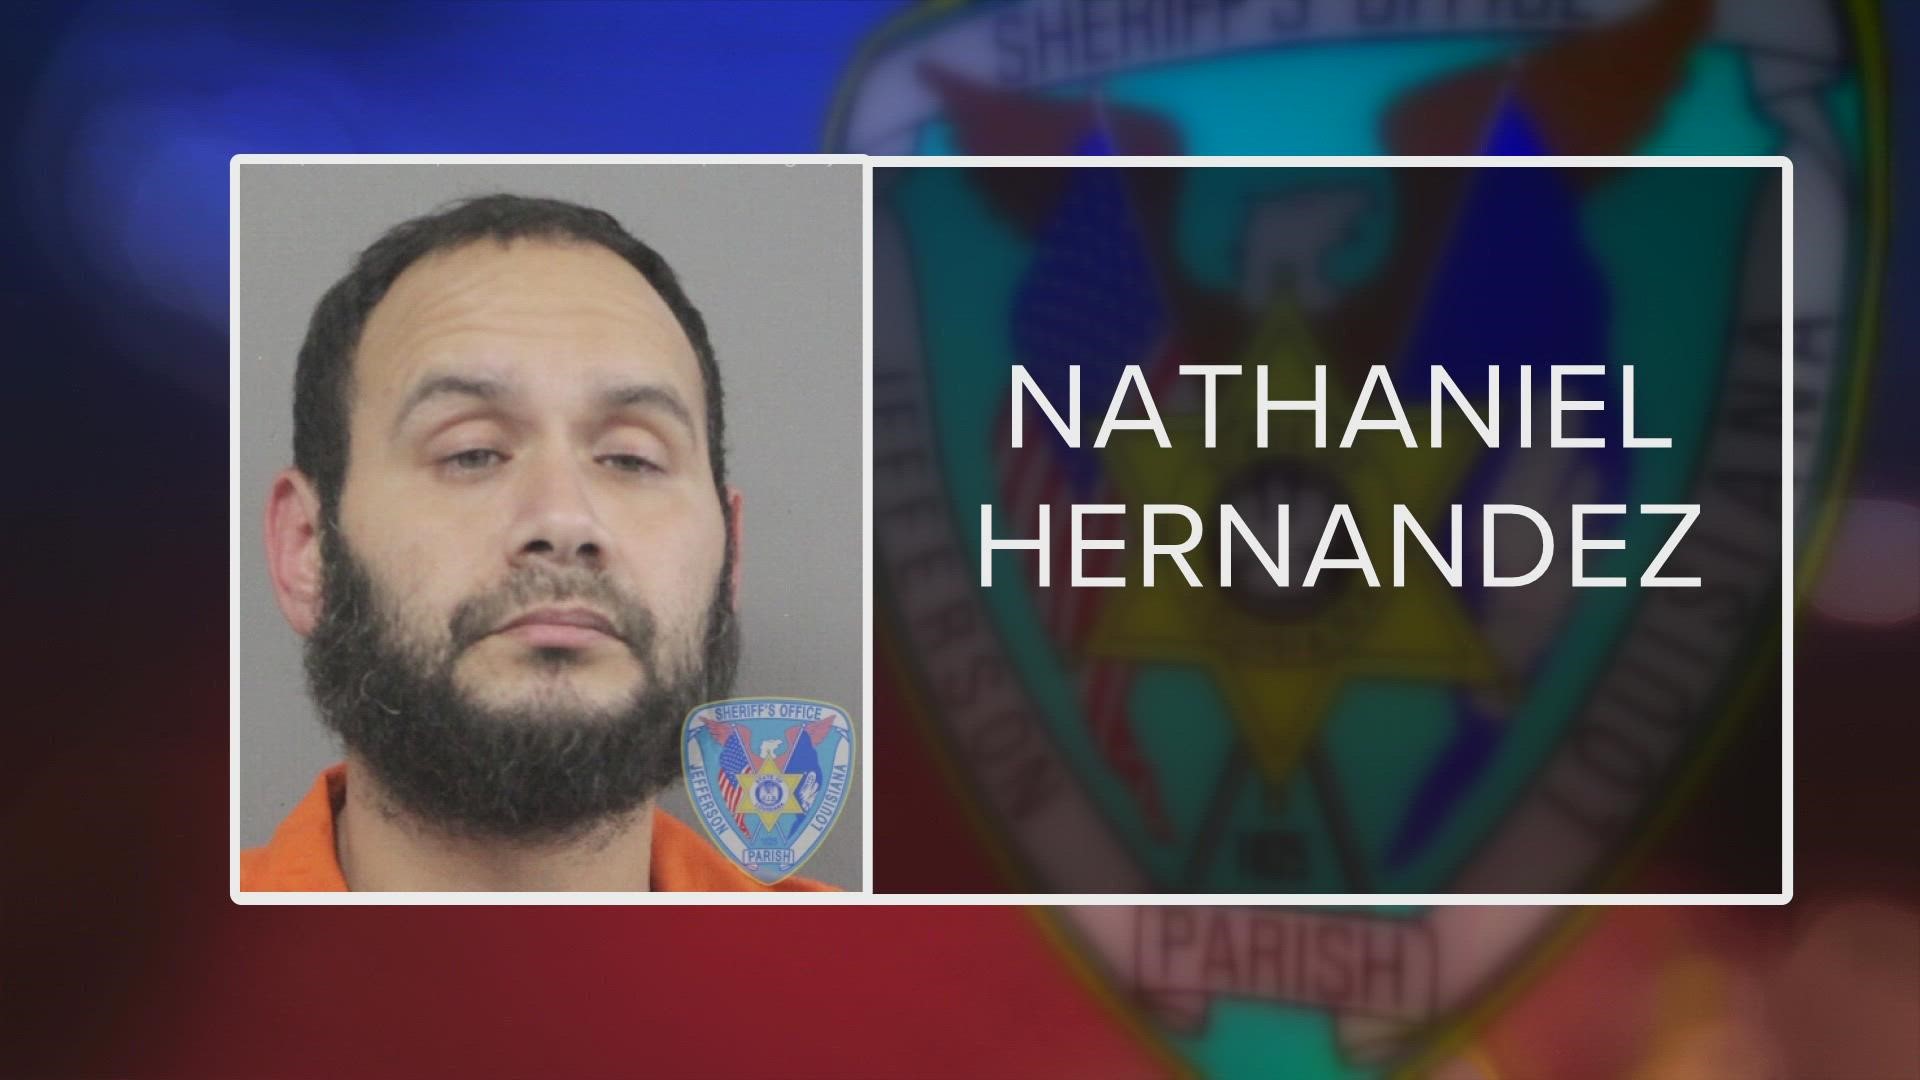 Nathaniel Hernandez was booked on second degree murder and obstruction of justice charges.